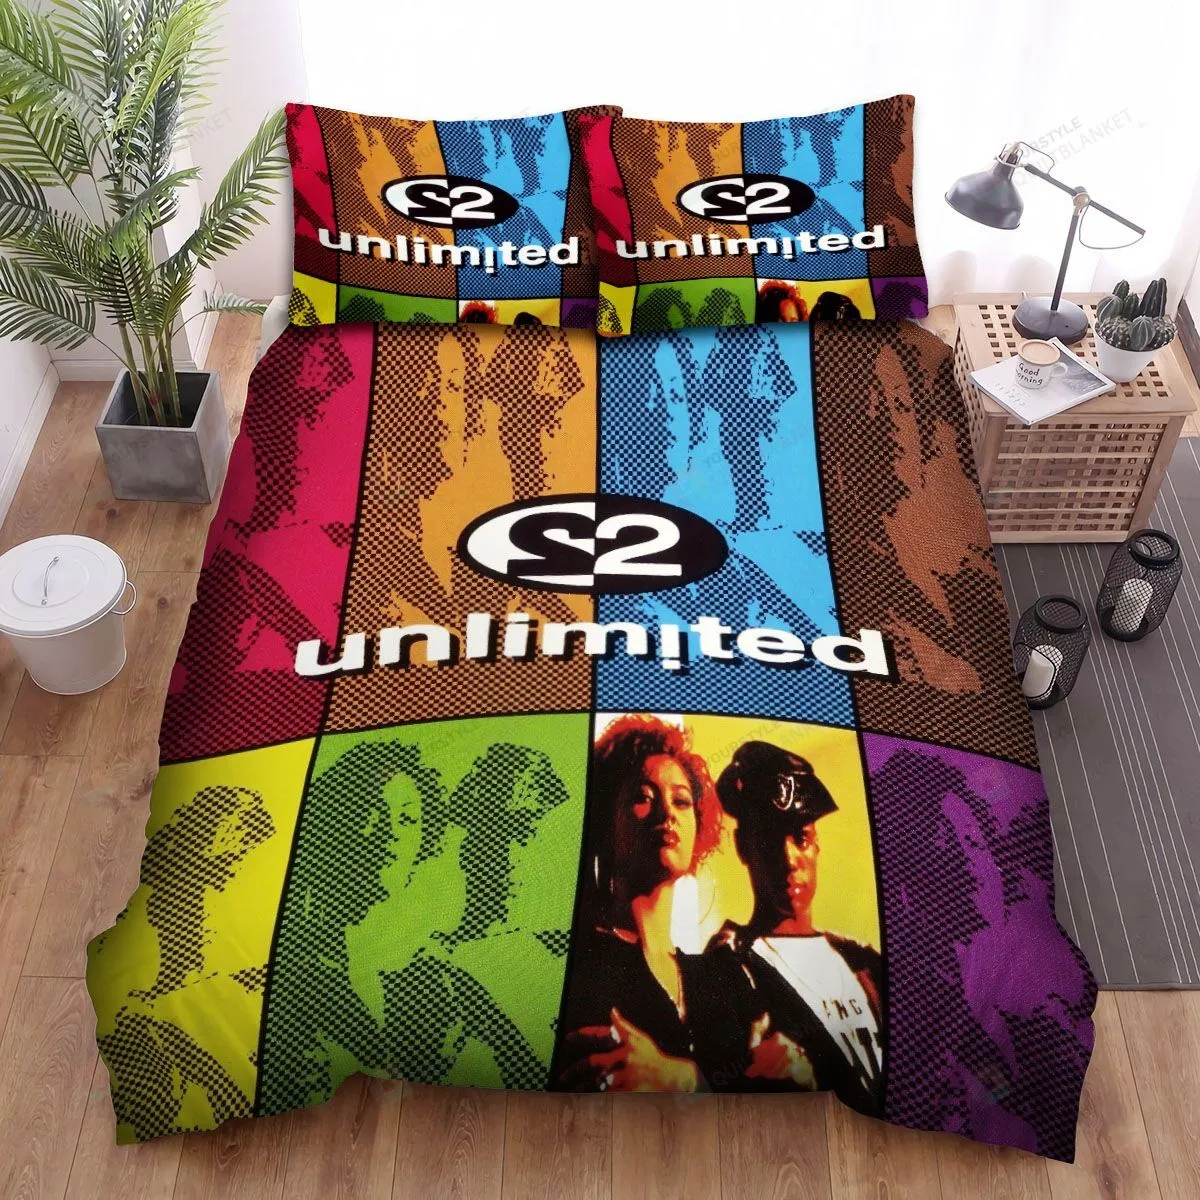 2 Unlimited Get Ready Colorful Bed Sheets Spread Comforter Duvet Cover Bedding Sets